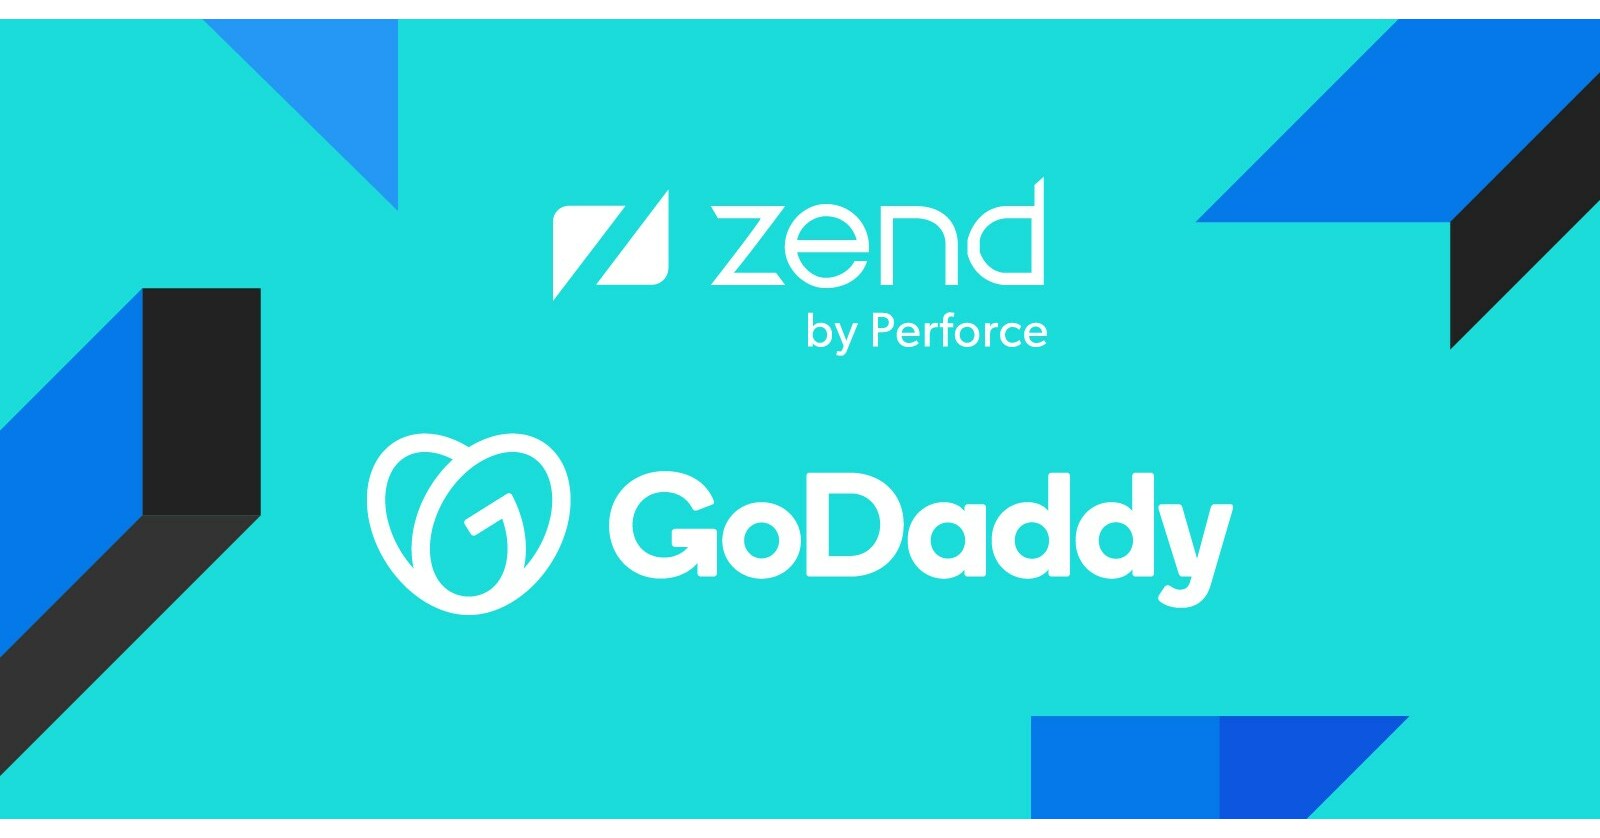 GoDaddy Managed WordPress Hosting Customers Now Getting PHP Lifecycle Support from Zend by Perforce